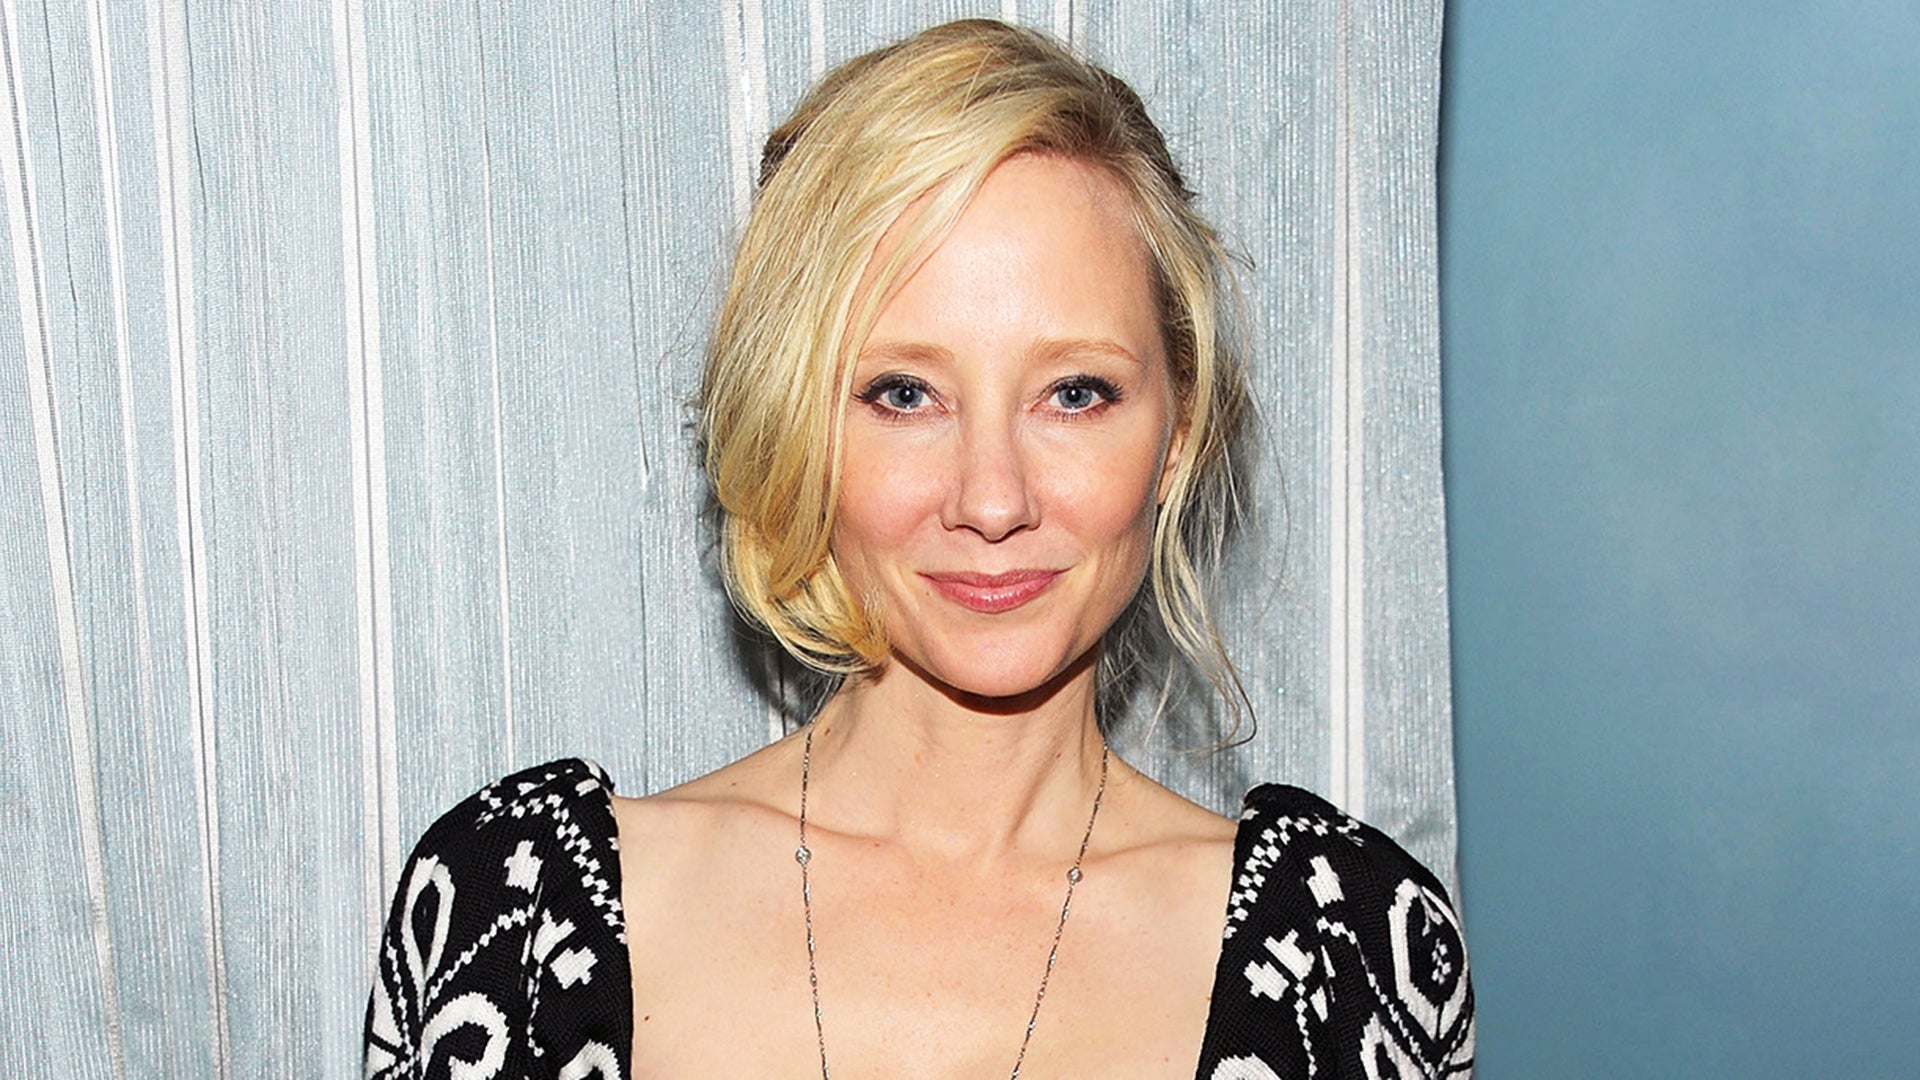 Anne Heche: Woman Whose Home Was Destroyed in Car Crash Is 'Recovering' During 'Insane, Traumatic Time' | Entertainment Tonight